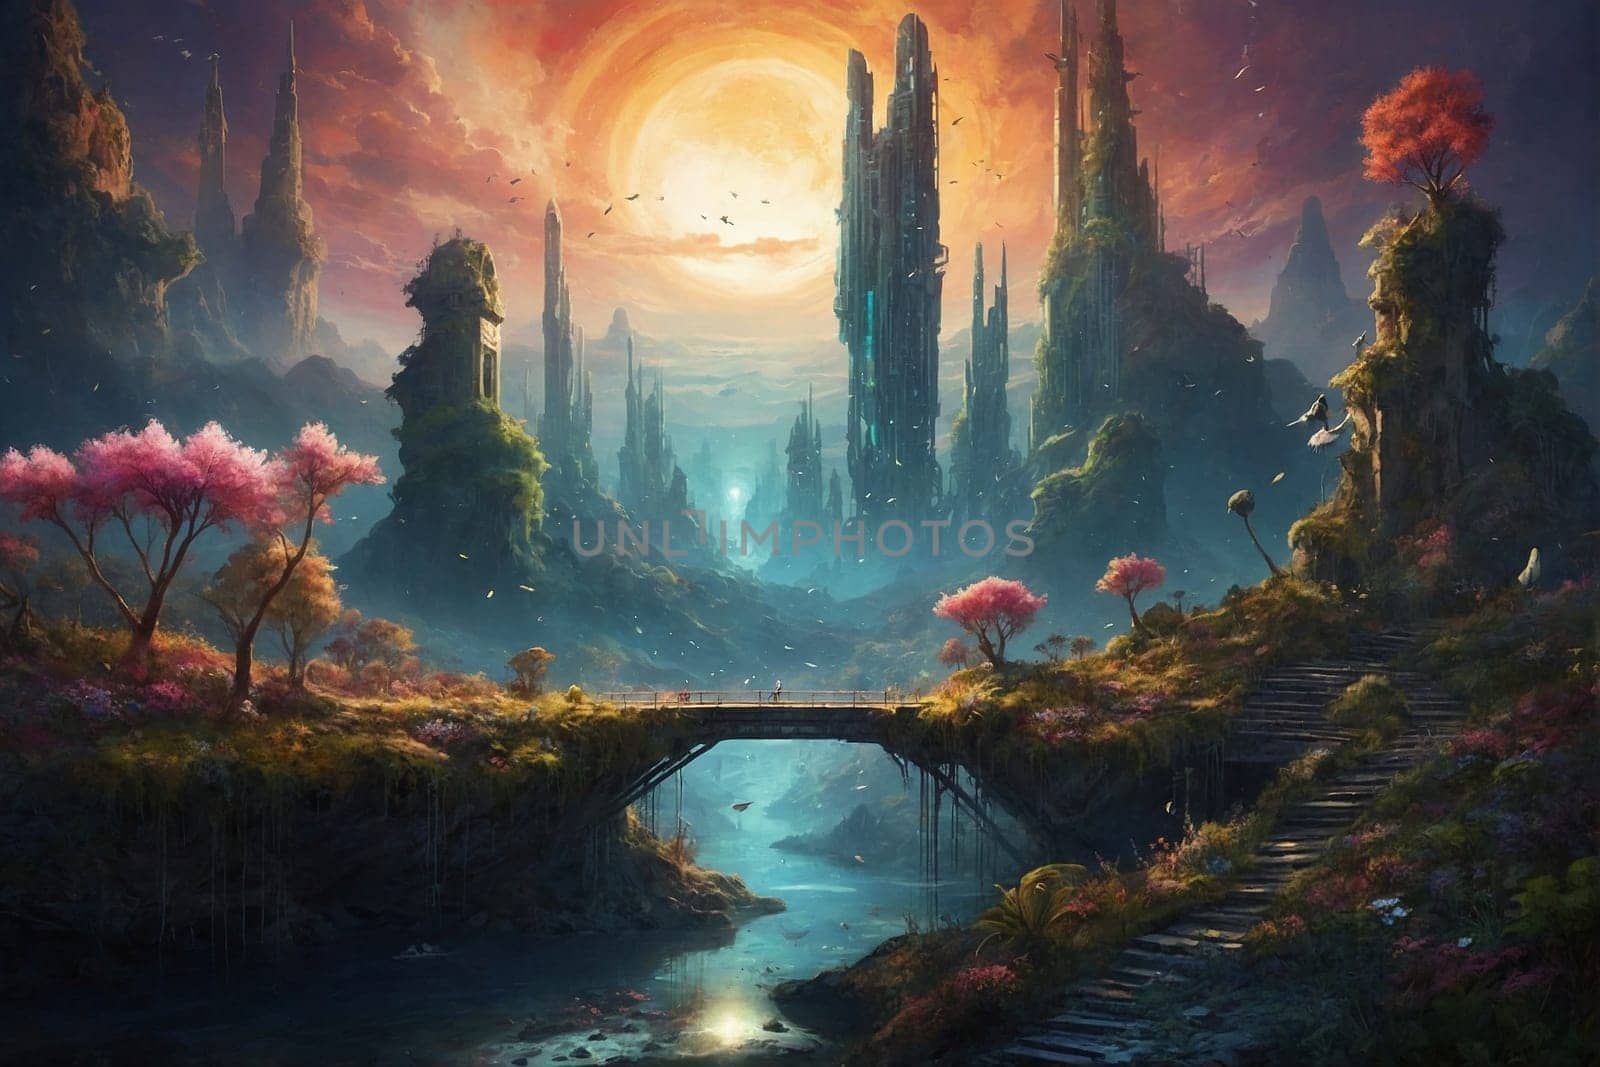 This photo depicts a fantasy landscape featuring a majestic bridge crossing over a scenic environment.